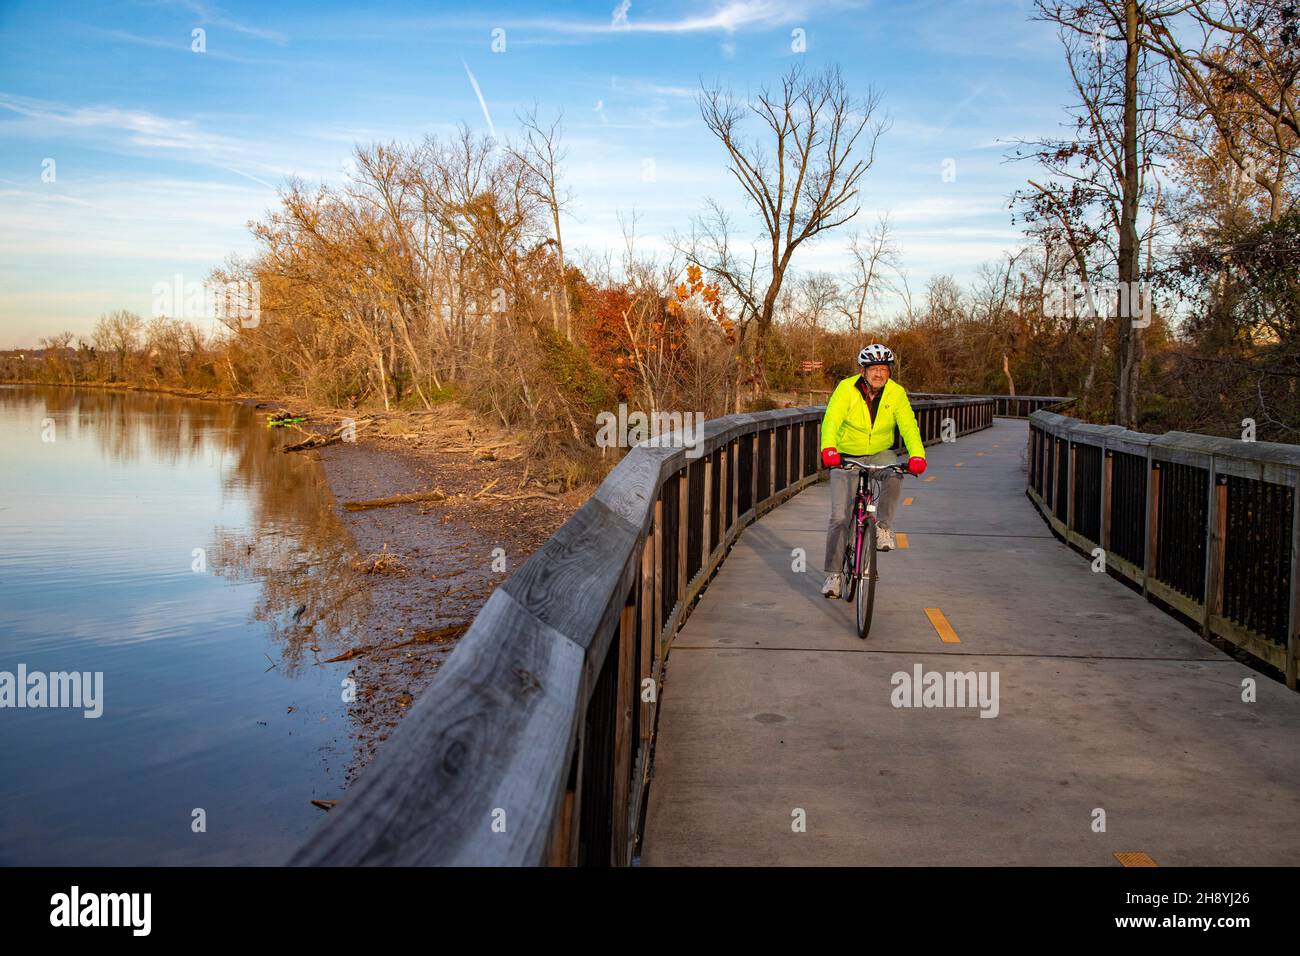 Washington, DC - John West, 75, rides his bicycle along the extensive network of trails lining the Anacostia River in Washington and suburban Maryland Stock Photo